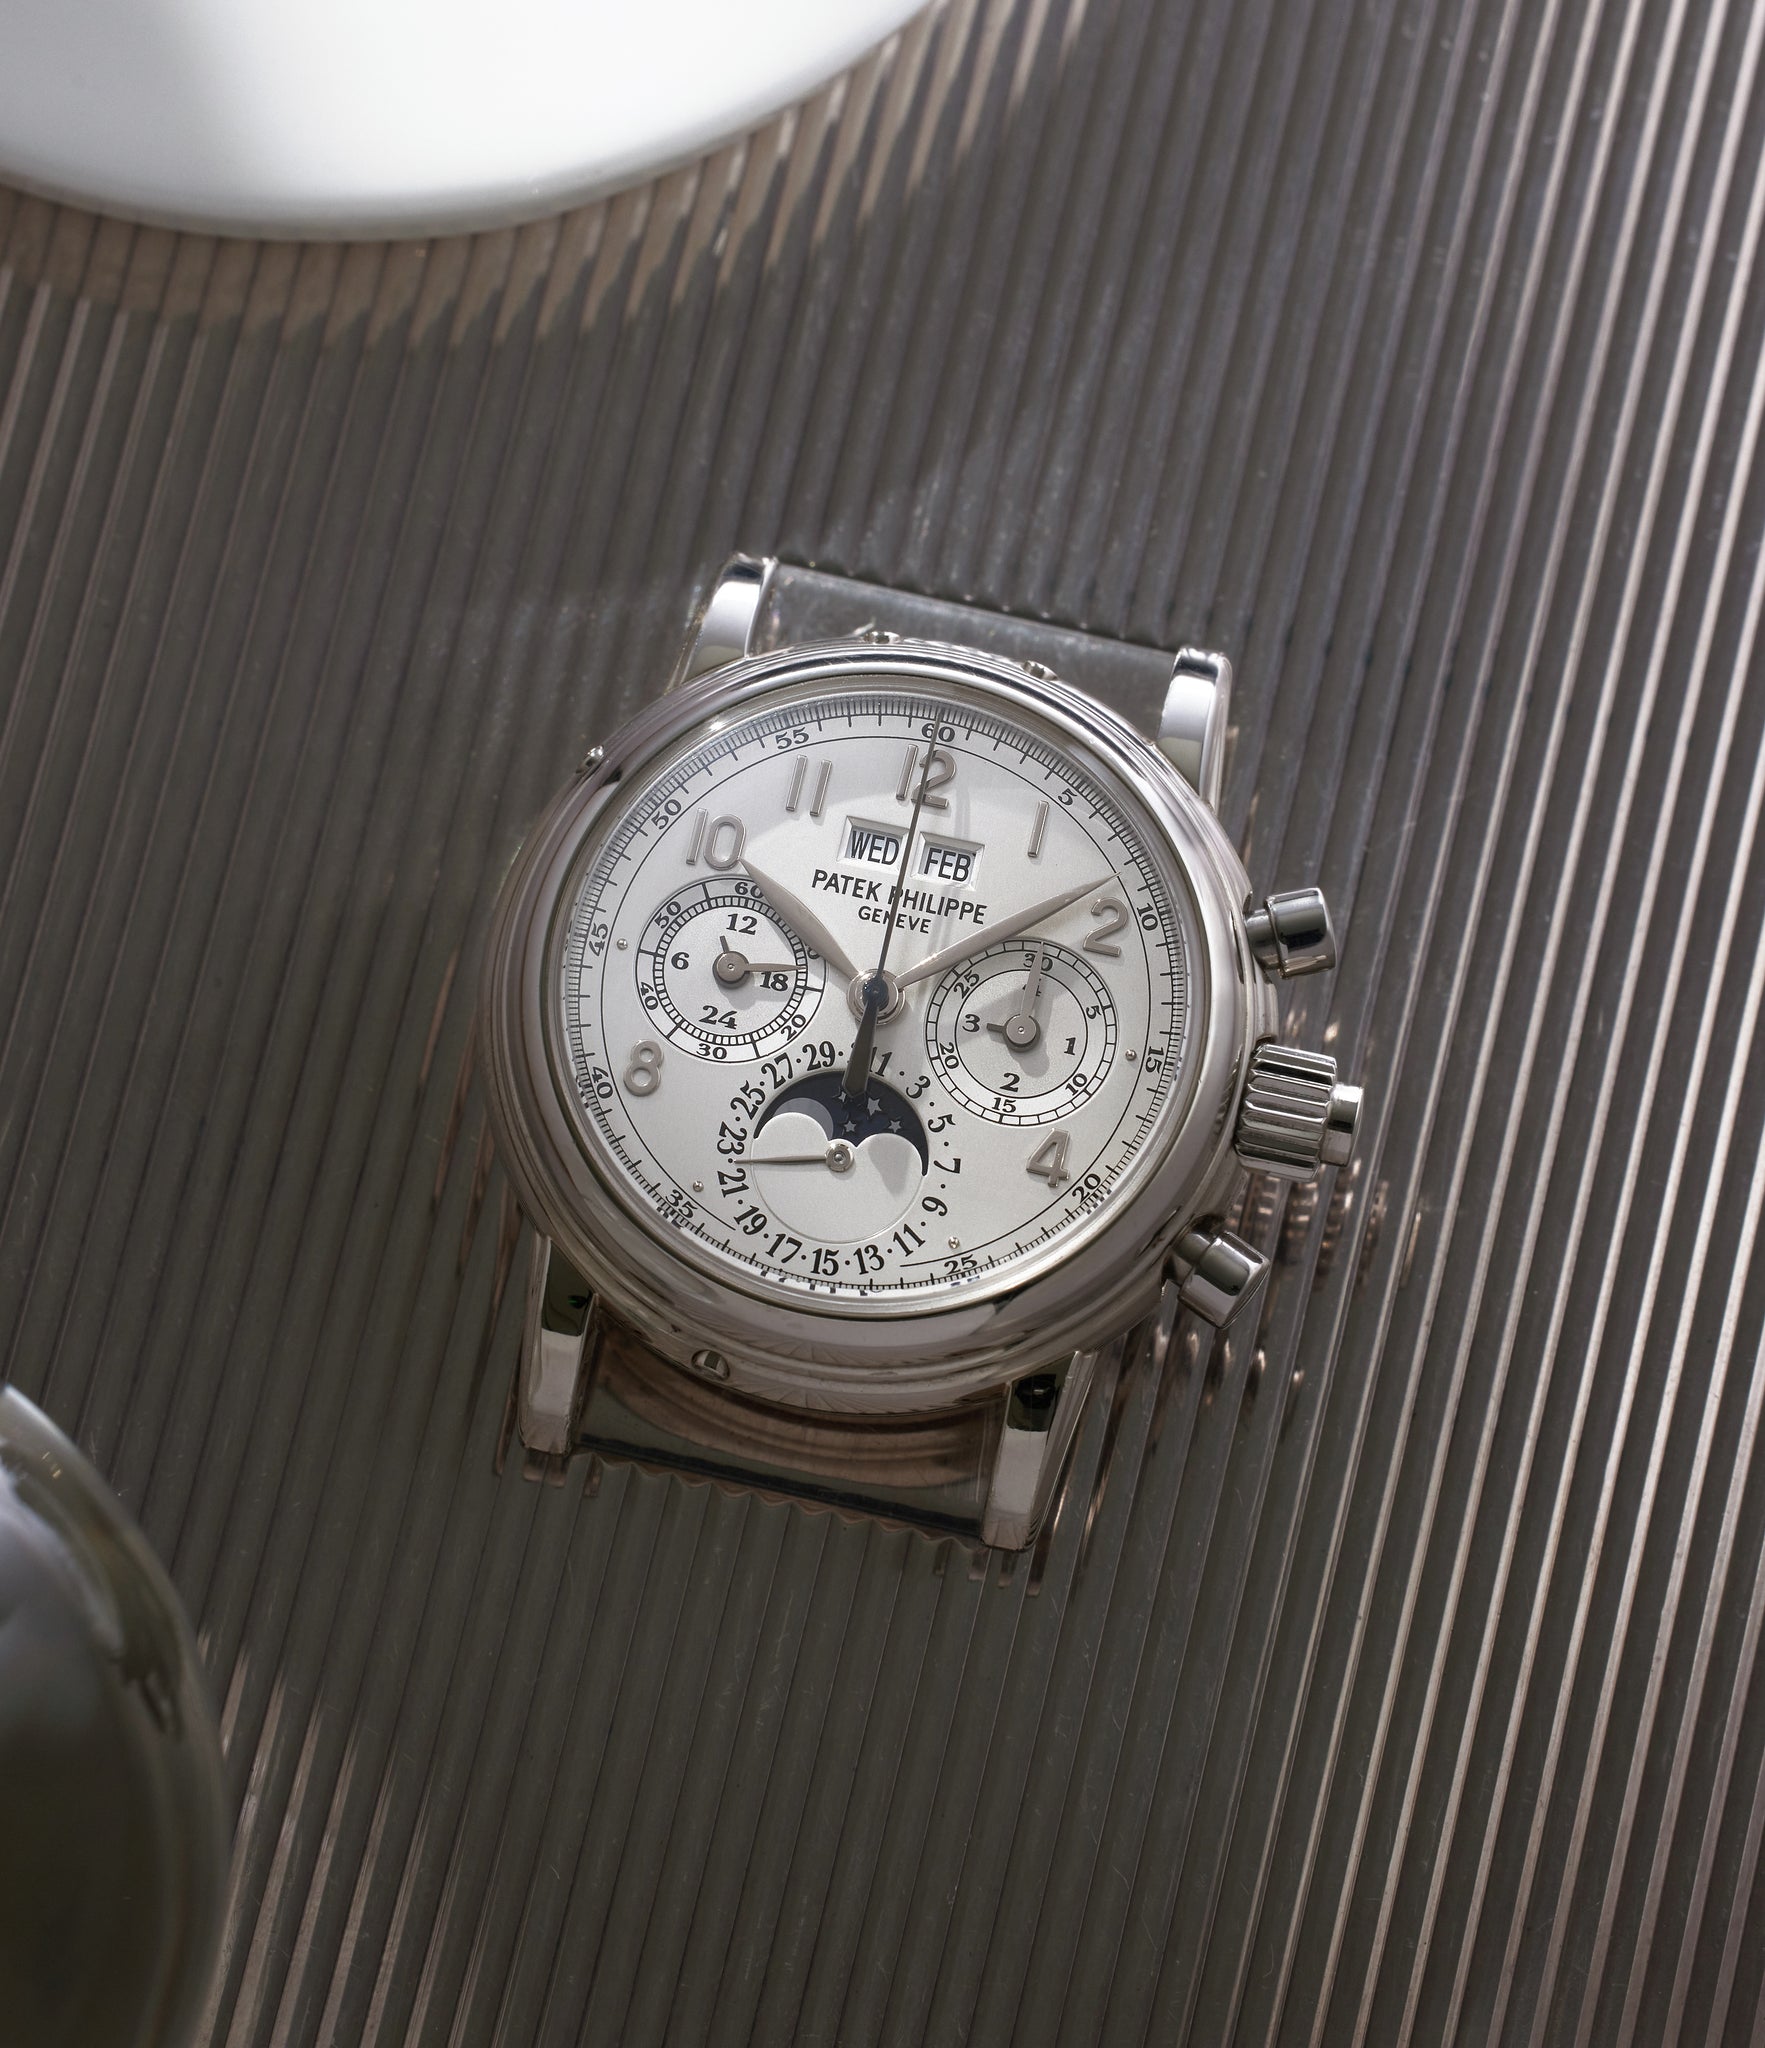 Front dial case | Patek Philippe | Split Seconds Chronograph | 5004 | White Gold | Available worldwide at A Collected Man